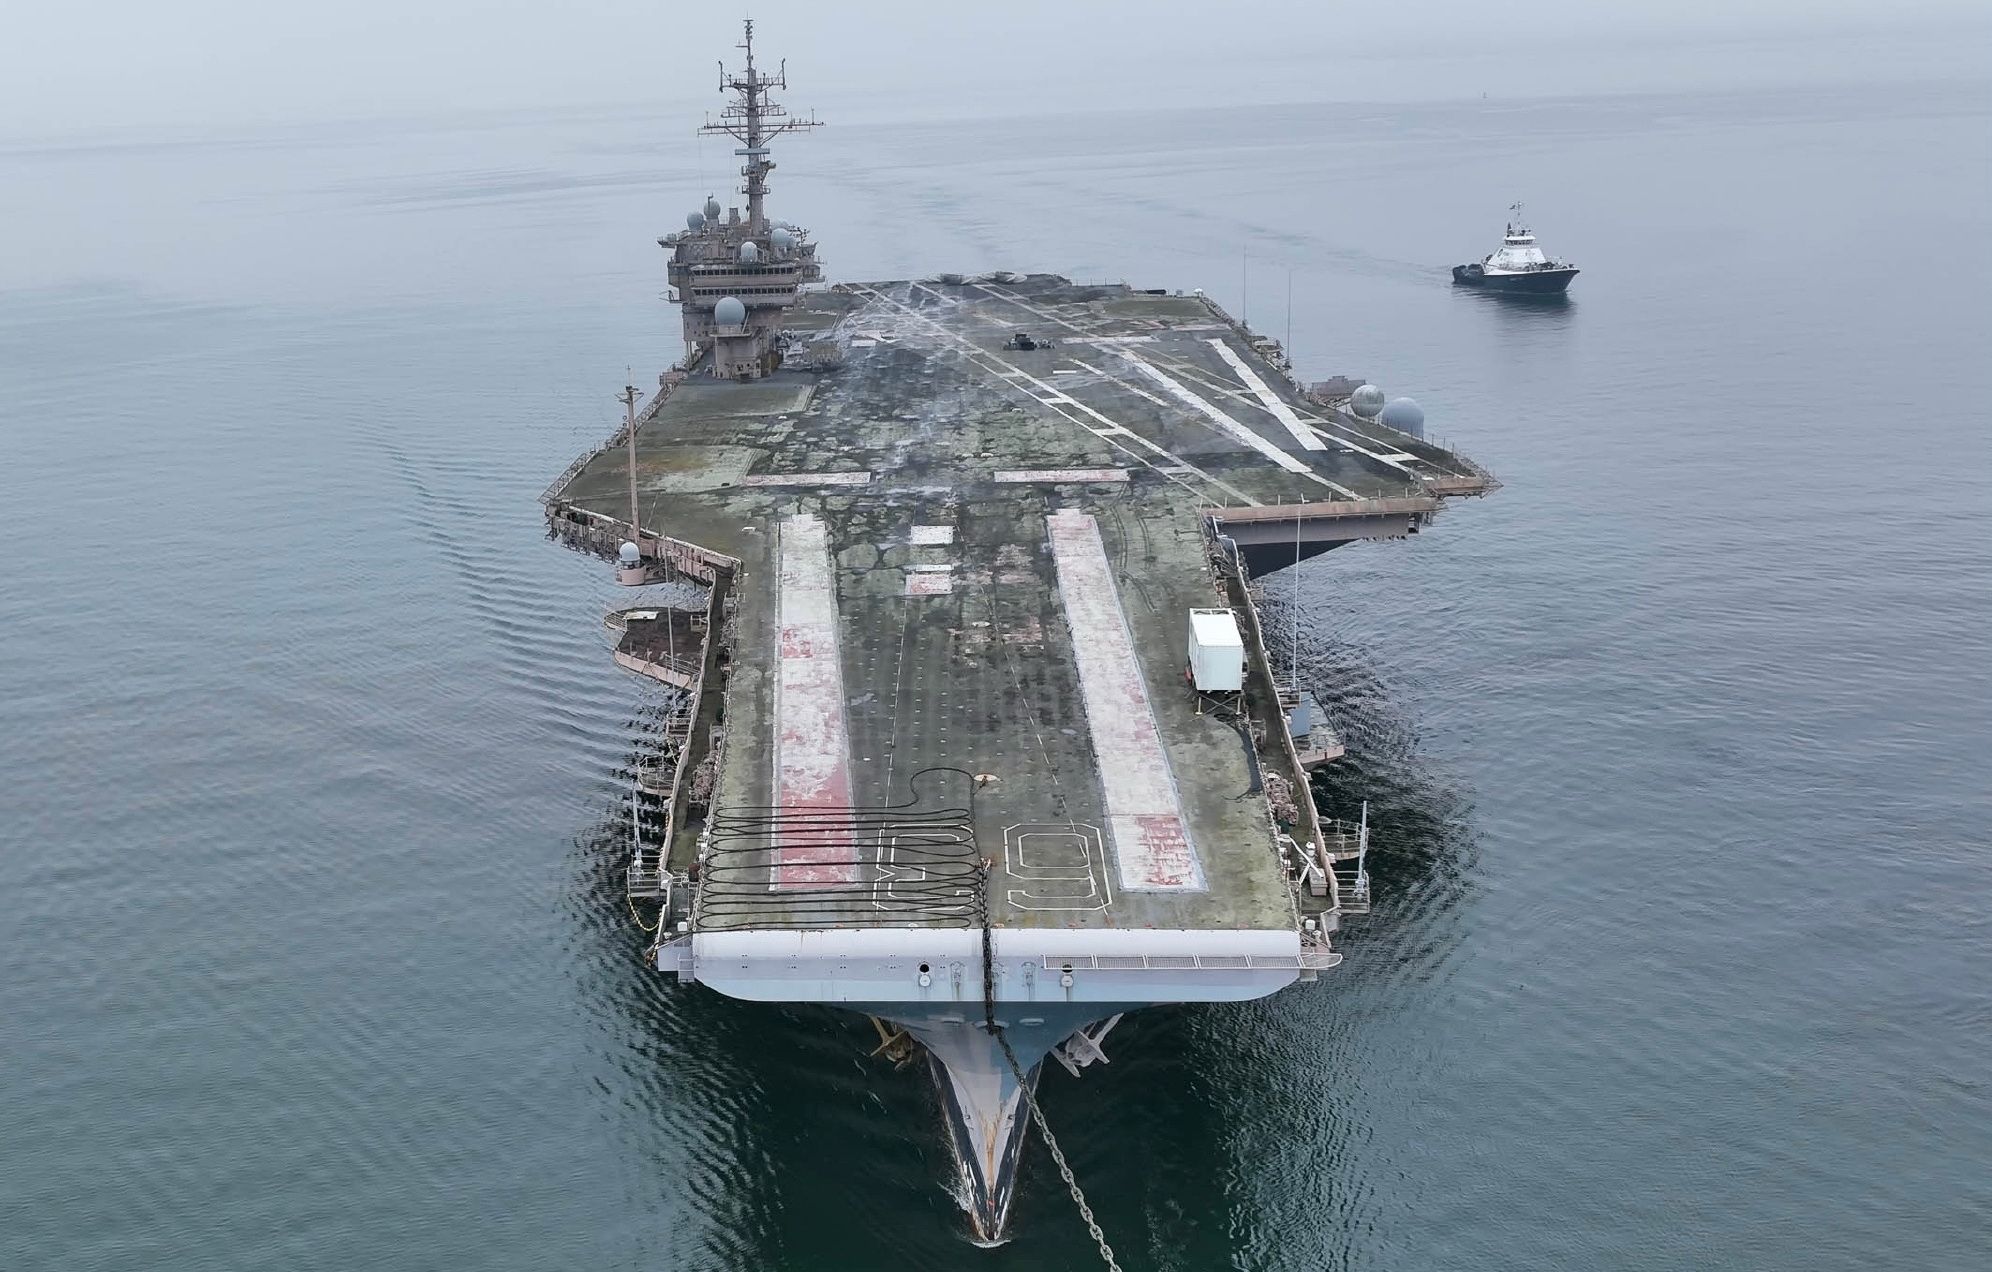 The tale of USS Kitty Hawk: Once a naval icon, now sold for cents